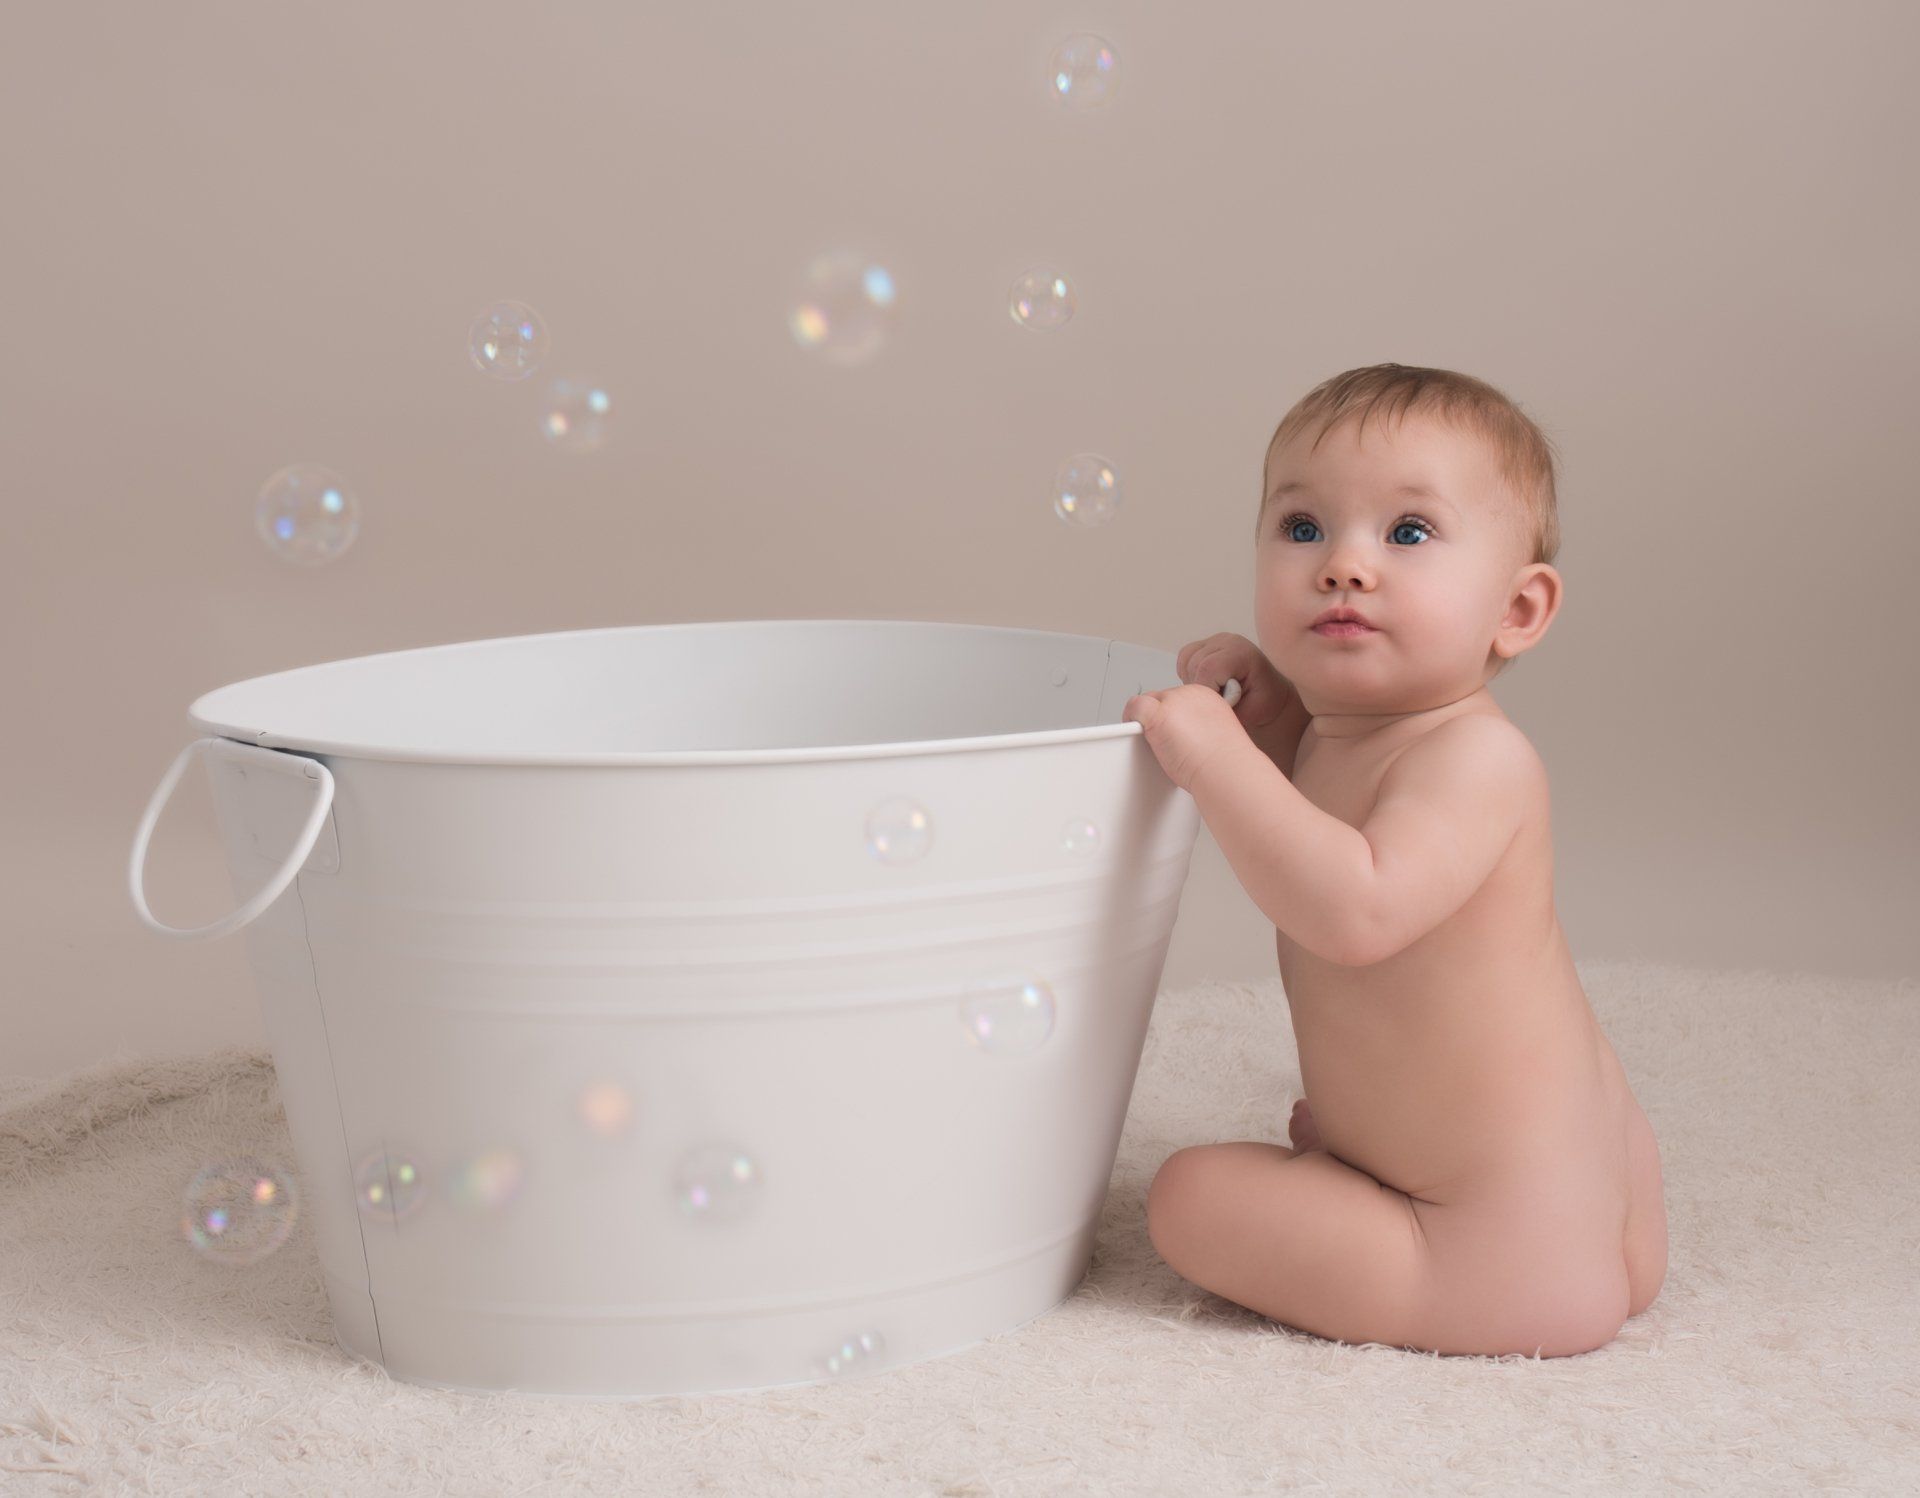 Toddler in Hertford Studio watching bubbles for sitter photo session